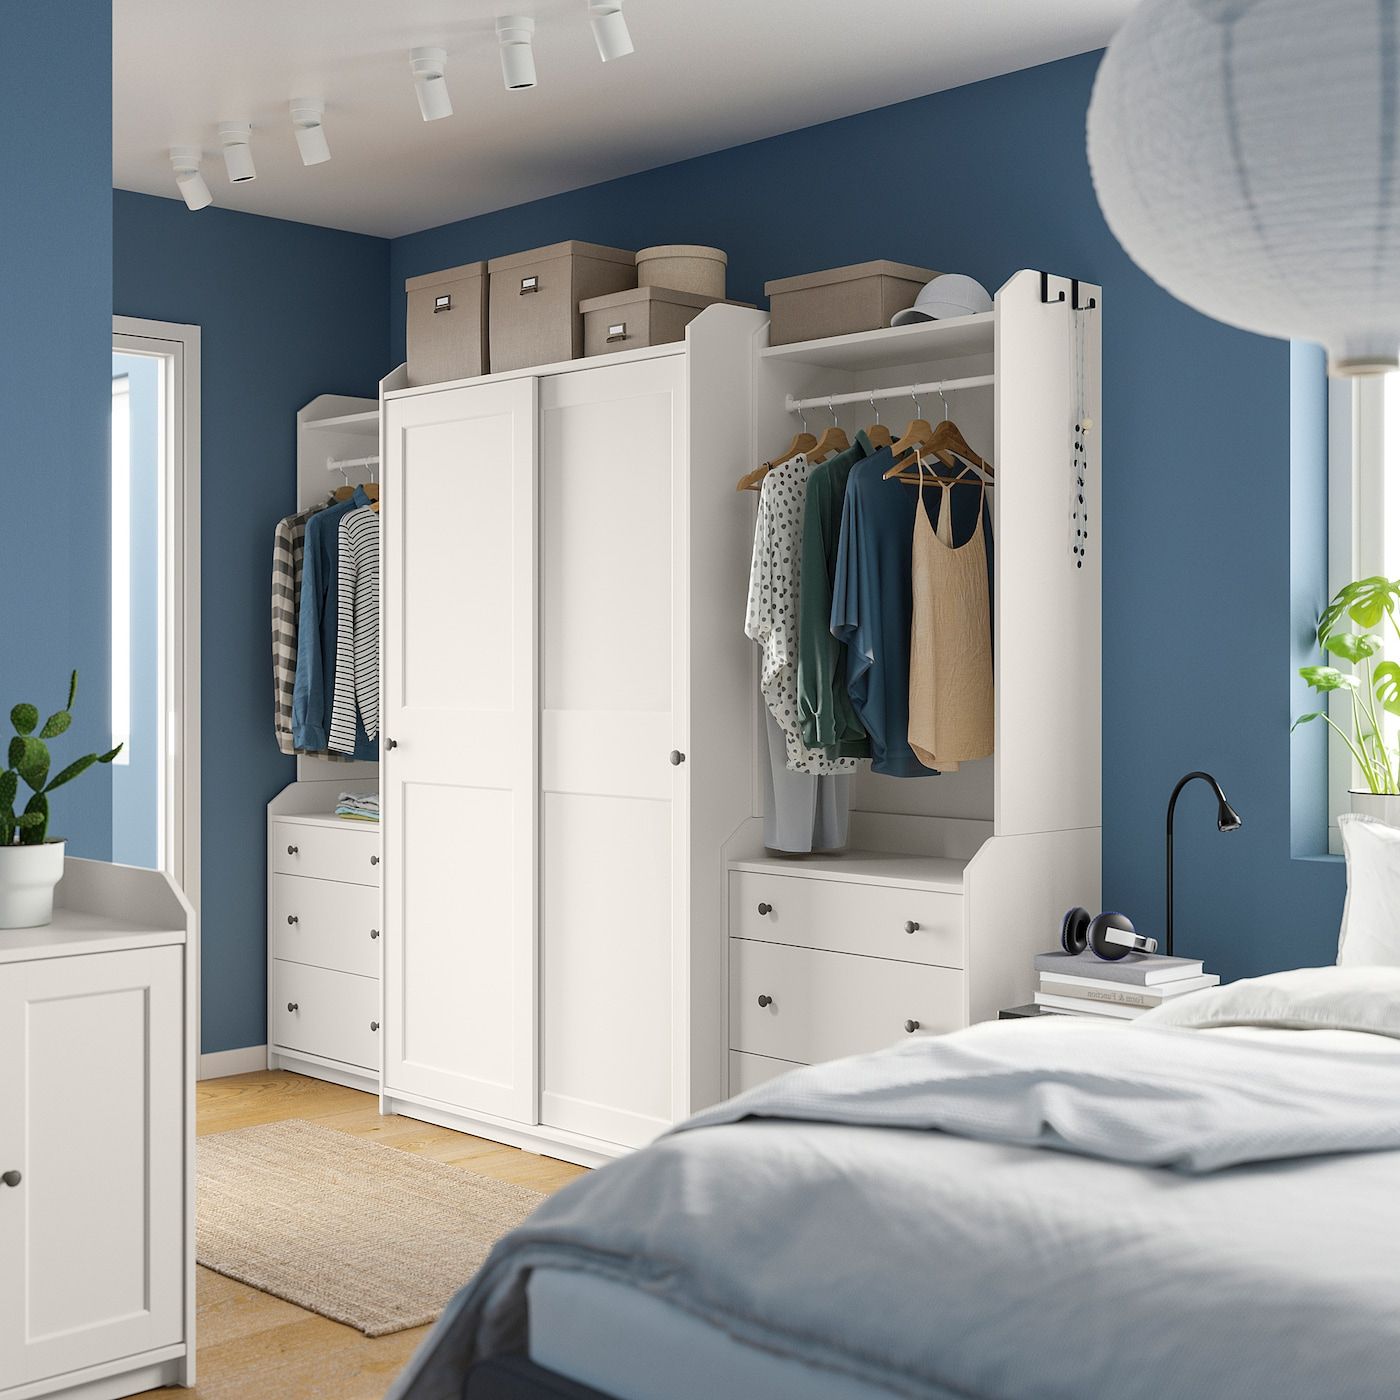 Hauga Wardrobe Combination, White, 1015/8x215/8x783/8" – Ikea Within Wardrobes And Chest Of Drawers Combined (View 7 of 20)